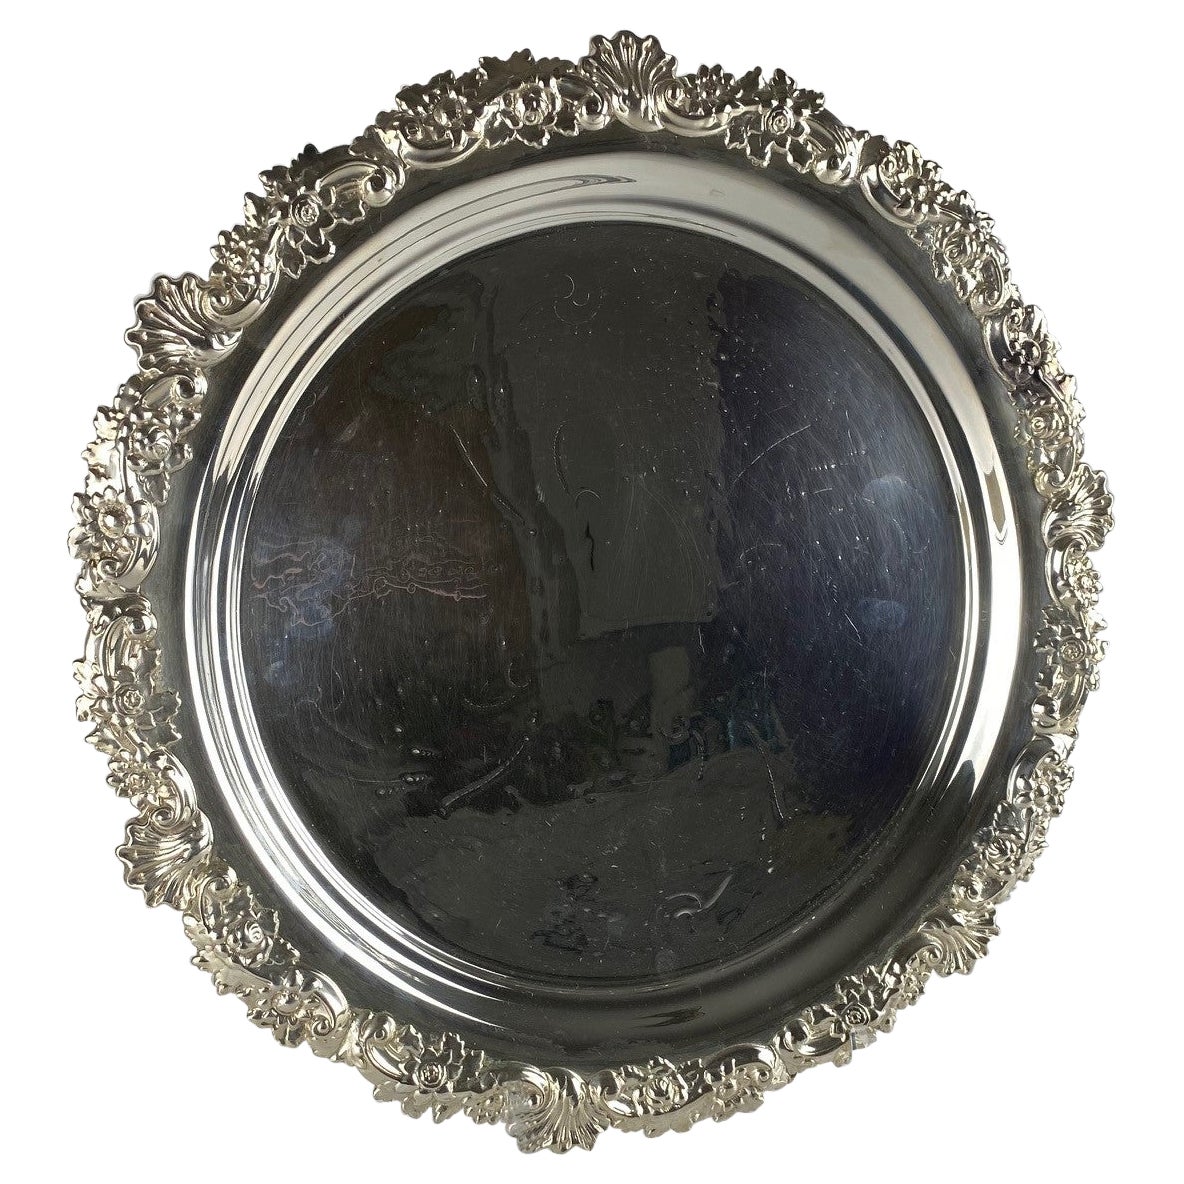 English Silver Plate Tray